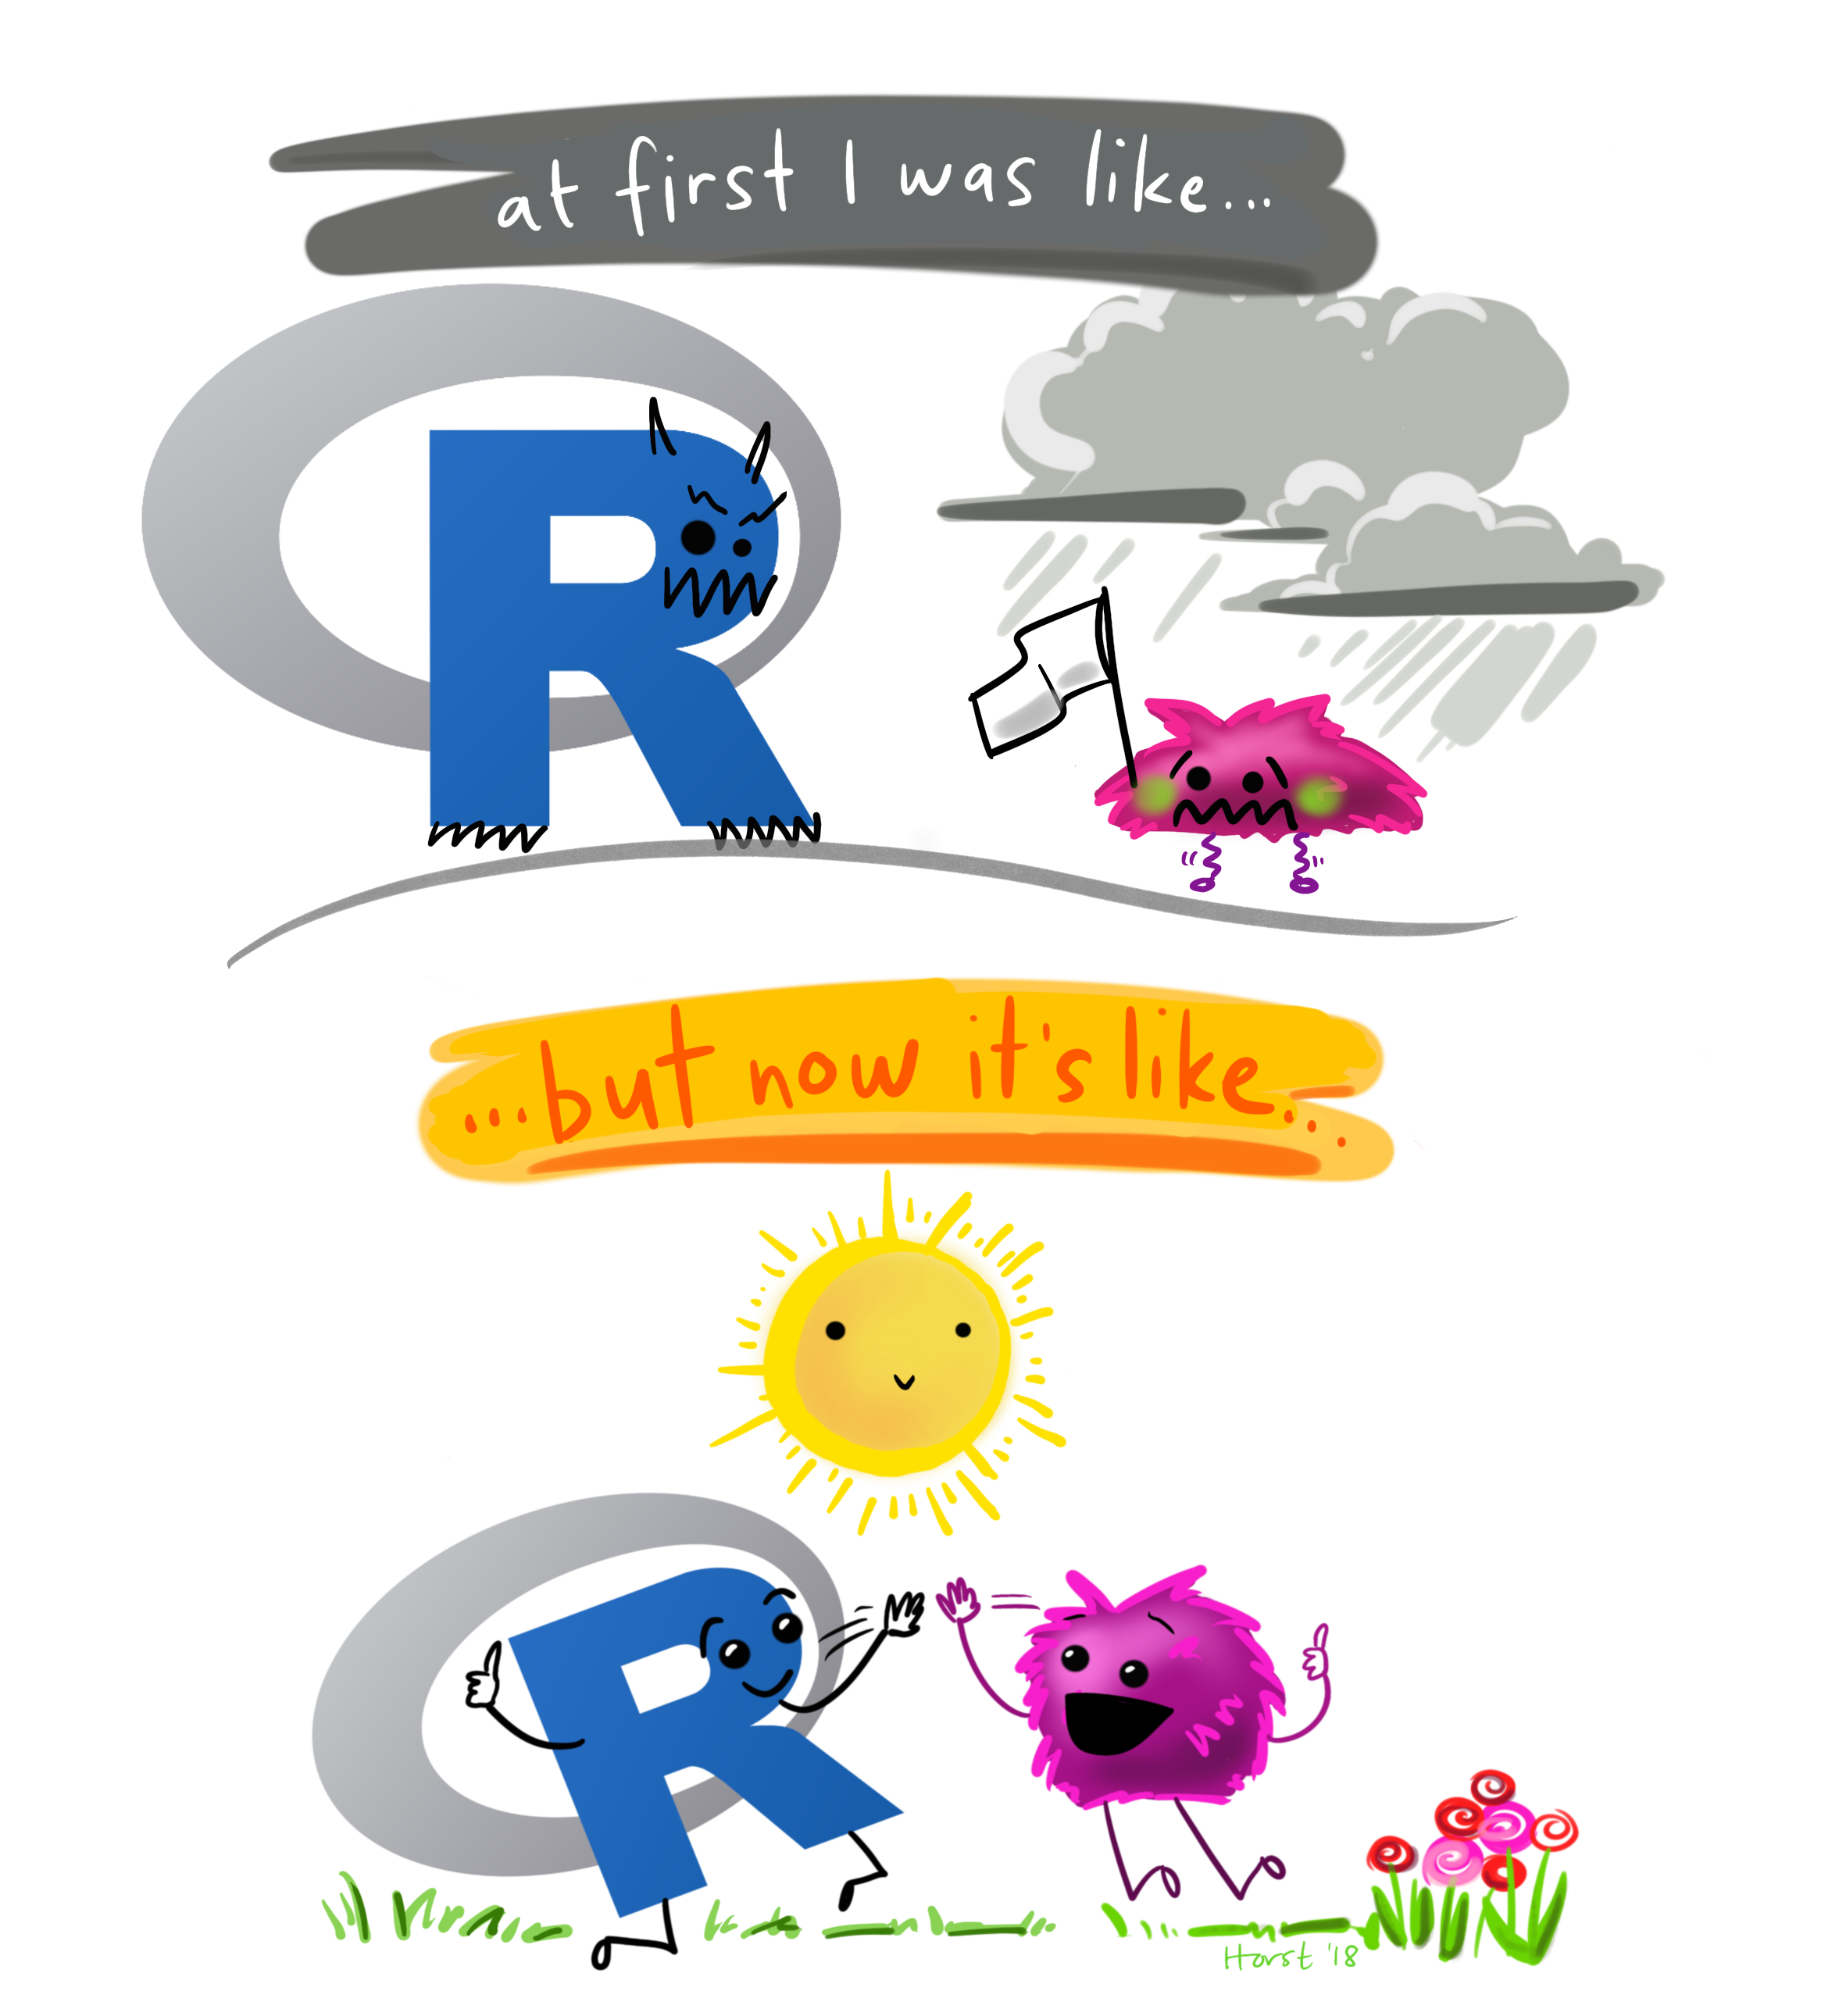 A digital cartoon with two illustrations: the top shows the R-logo with a scary face, and a small scared little fuzzy monster holding up a white flag in surrender while under a dark storm cloud. The text above says “at first I was like…” The lower cartoon is a friendly, smiling R-logo jumping up to give a happy fuzzy monster a high-five under a smiling sun and next to colorful flowers. The text above the bottom illustration reads “but now it’s like…”